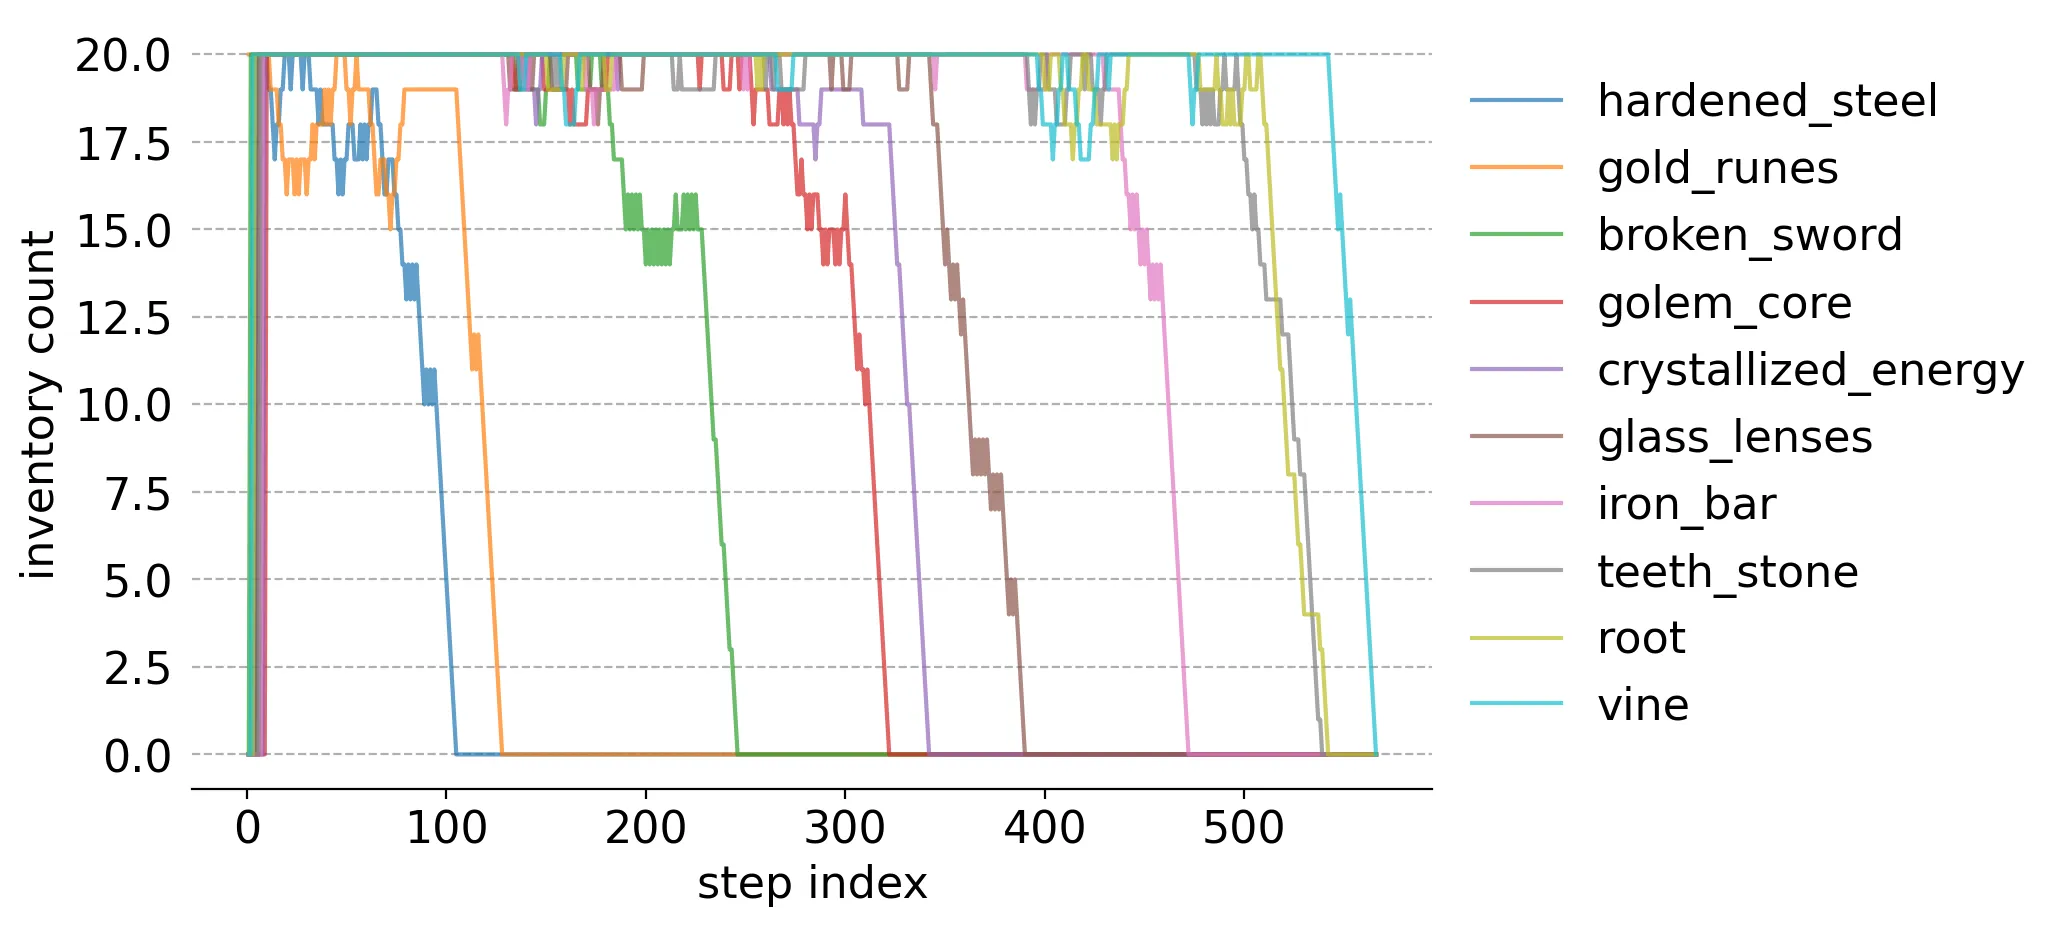 
    Plot of inventory item count versus step in simulation.
    Shows items being removed and added back to inventory, though items are drained/sold one-by-one
    in order of ideal price.